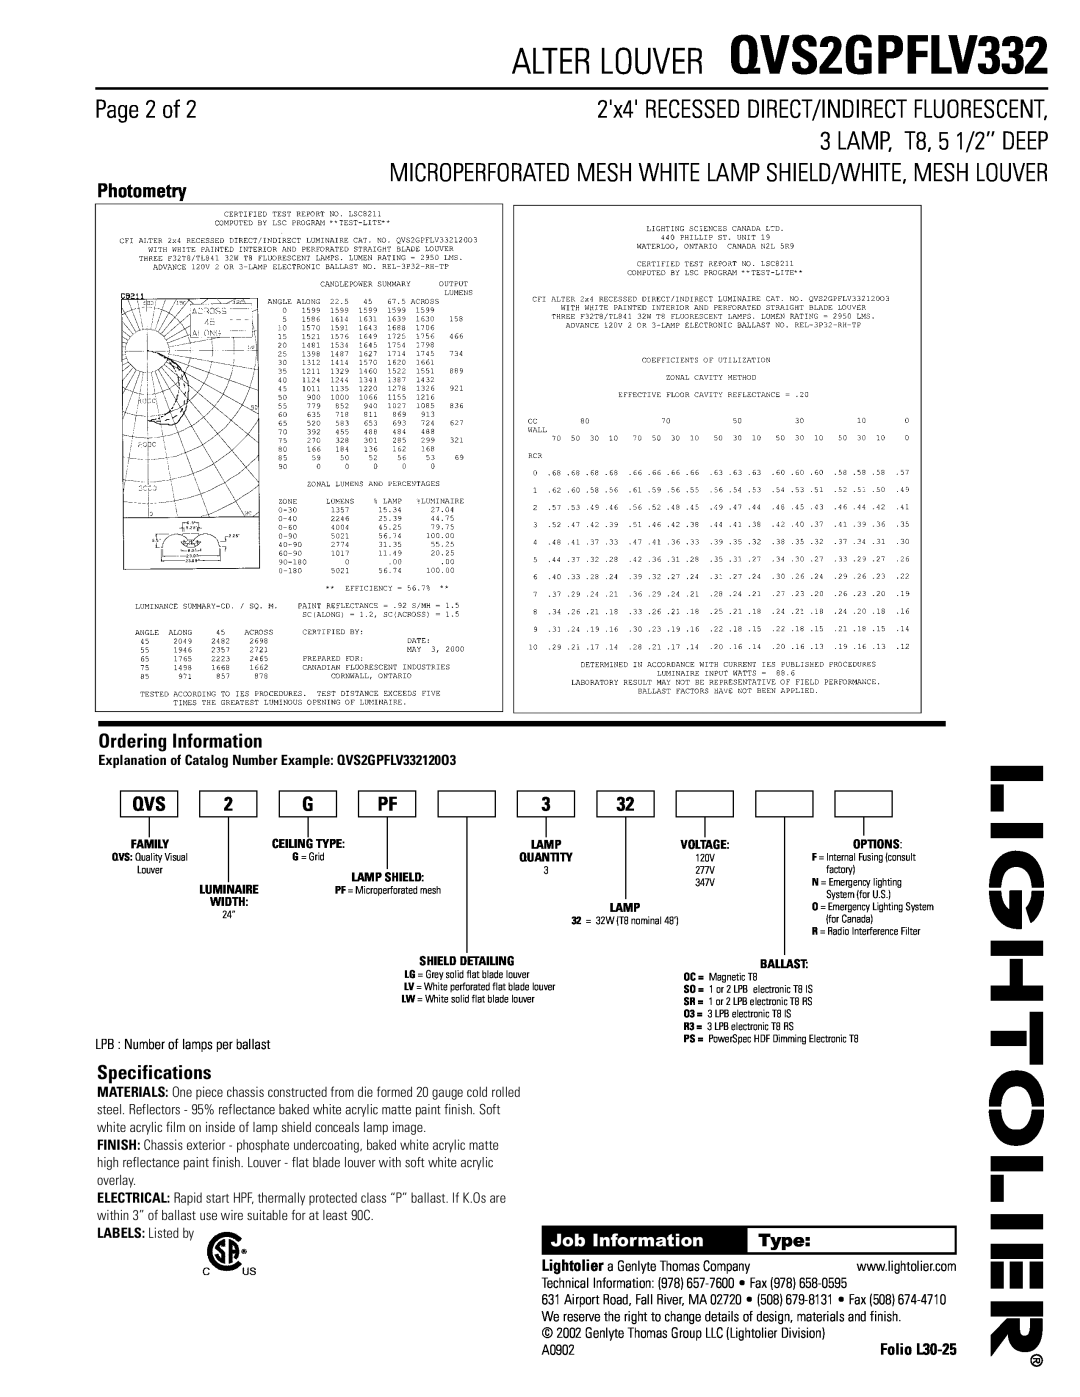 Lightolier Page 2 of, Photometry, Ordering Information, Specifications, ALTER LOUVER QVS2GPFLV332, Job Information 